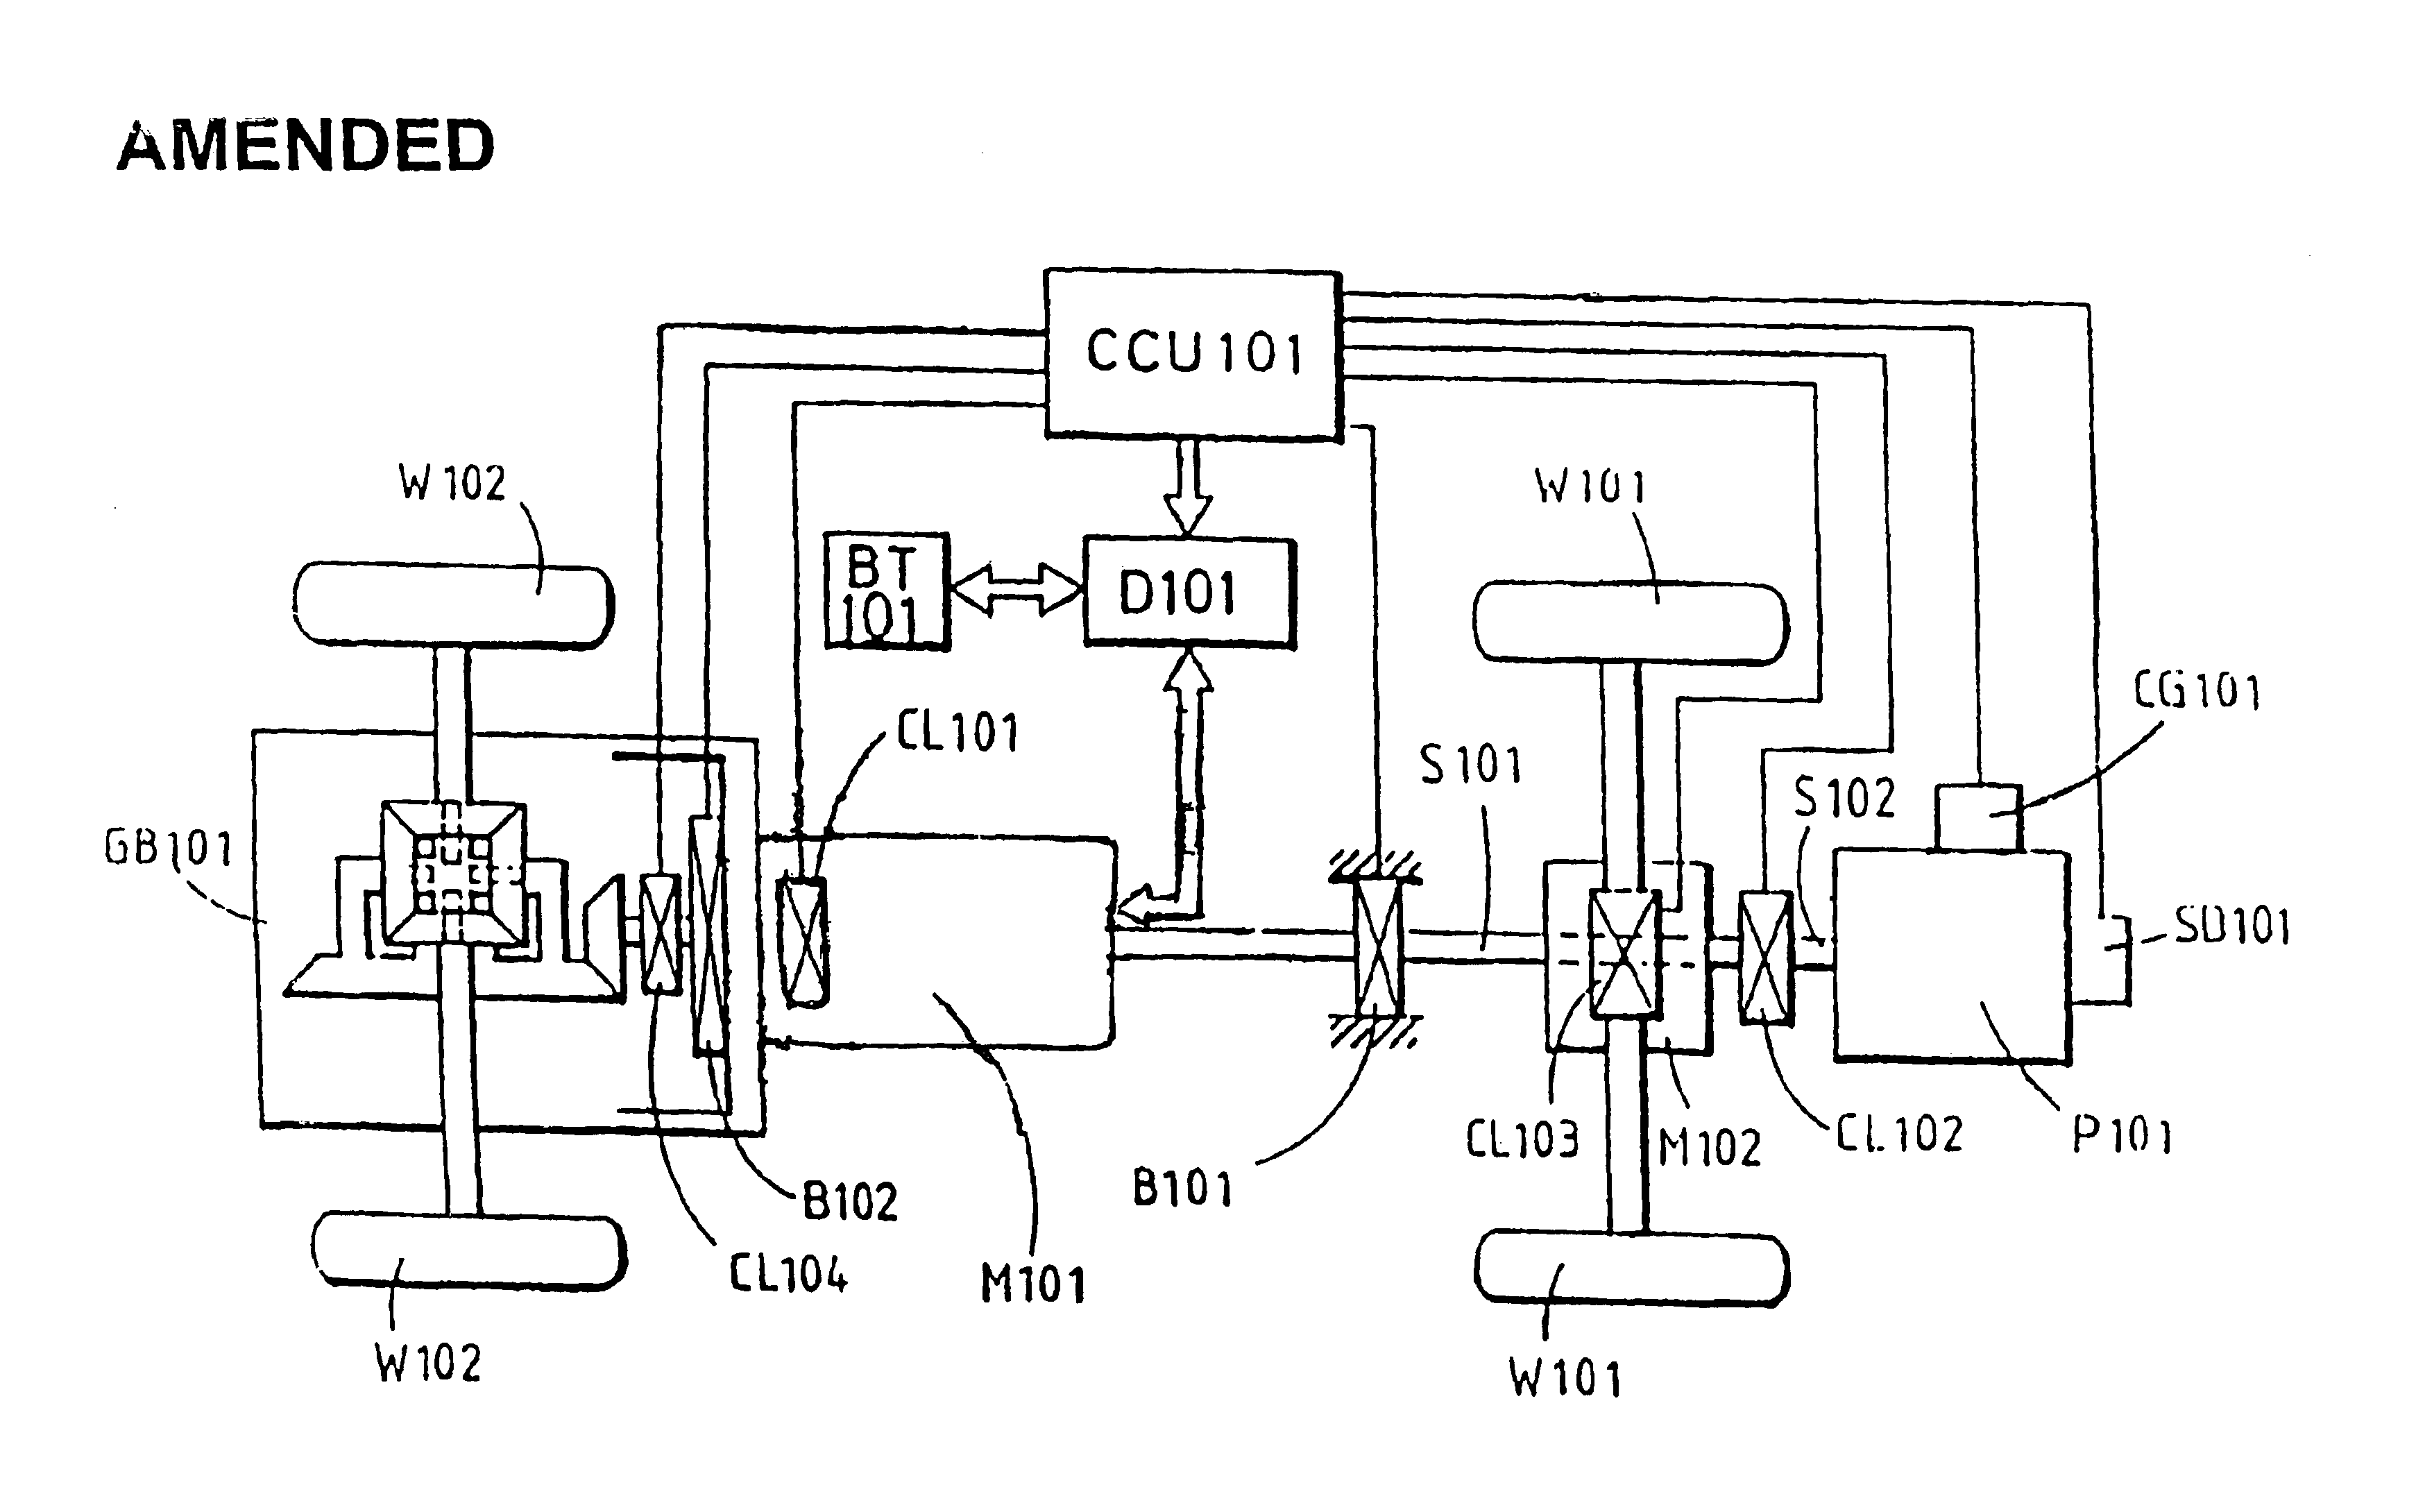 Distributed differential coupling combined power system